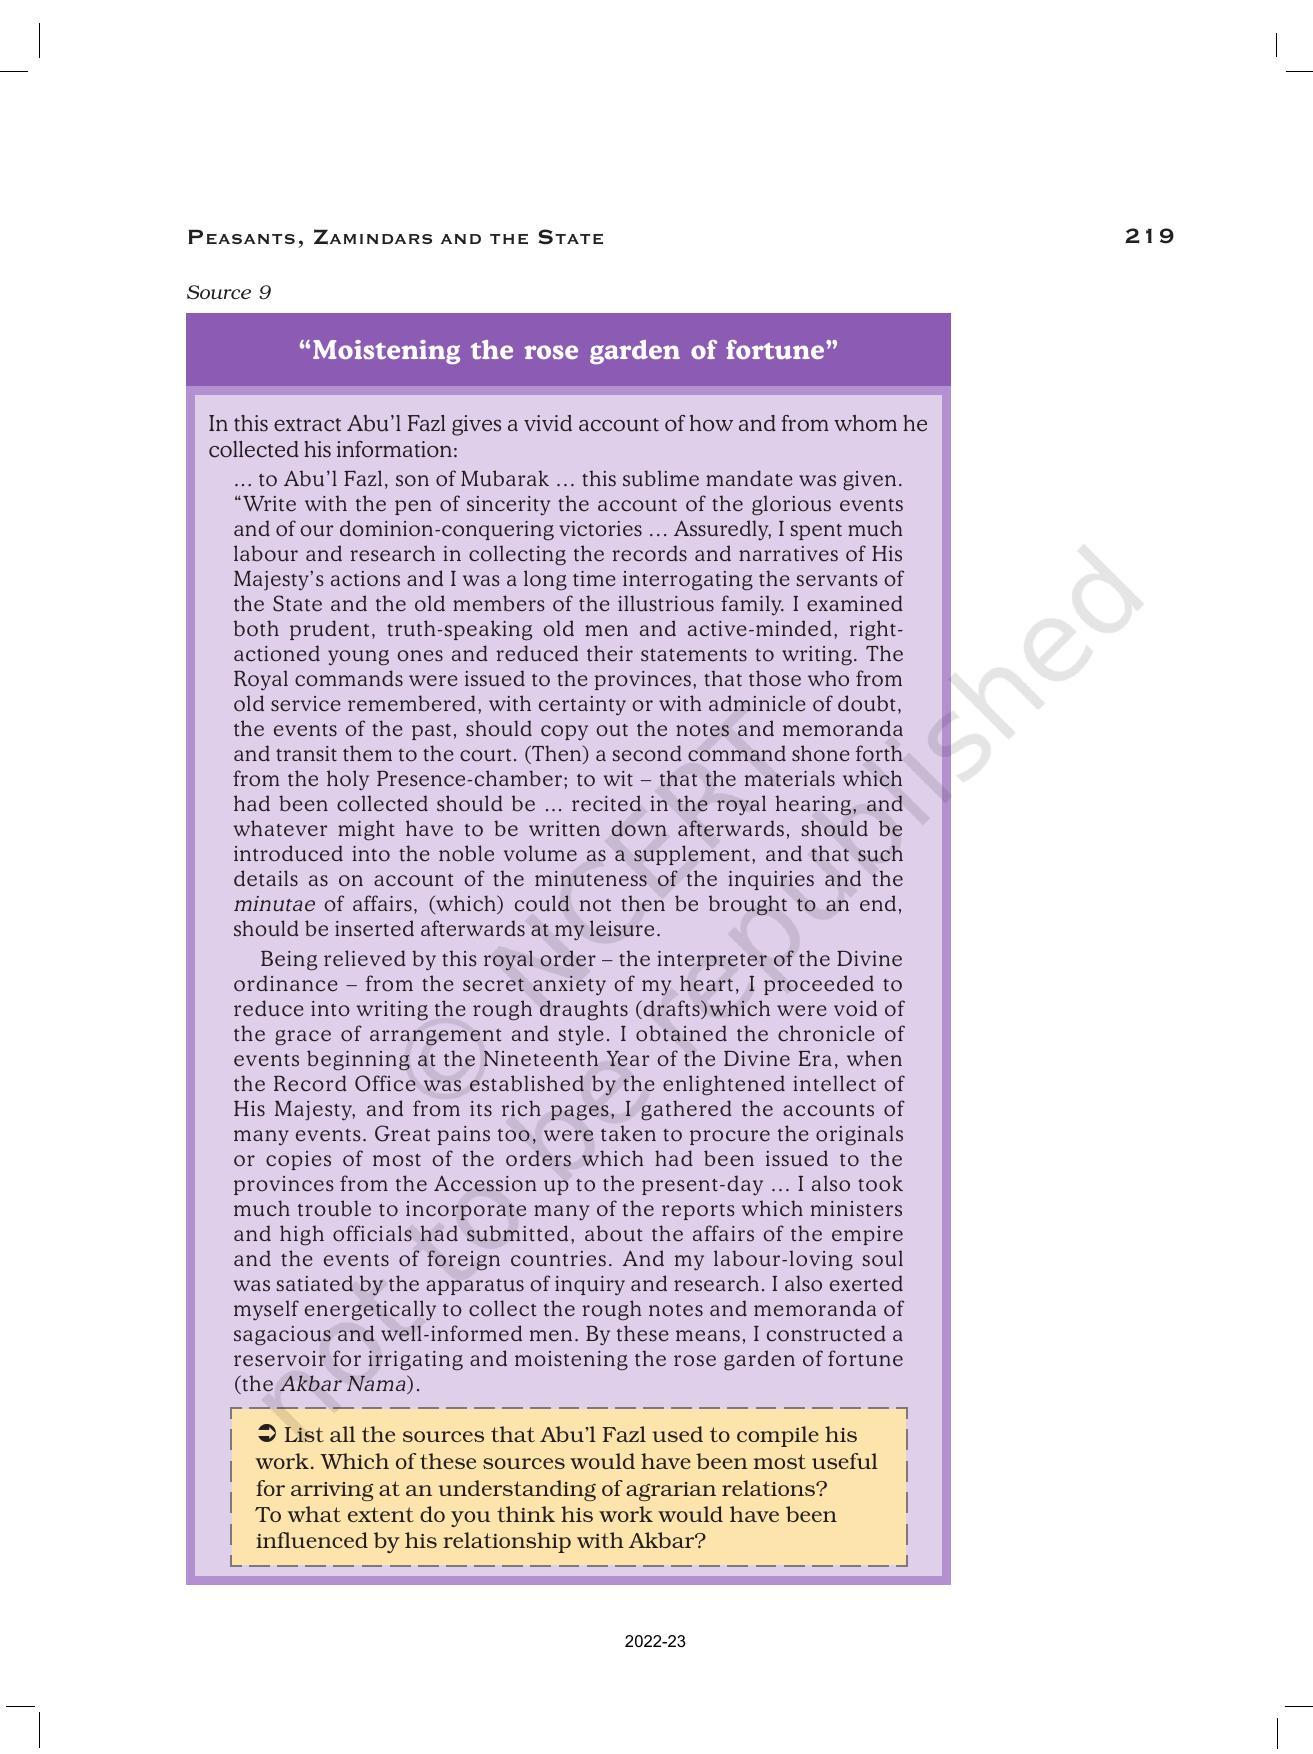 NCERT Book for Class 12 History (Part-II) Chapter 8 Peasants, Zamindars, and the State - Page 24